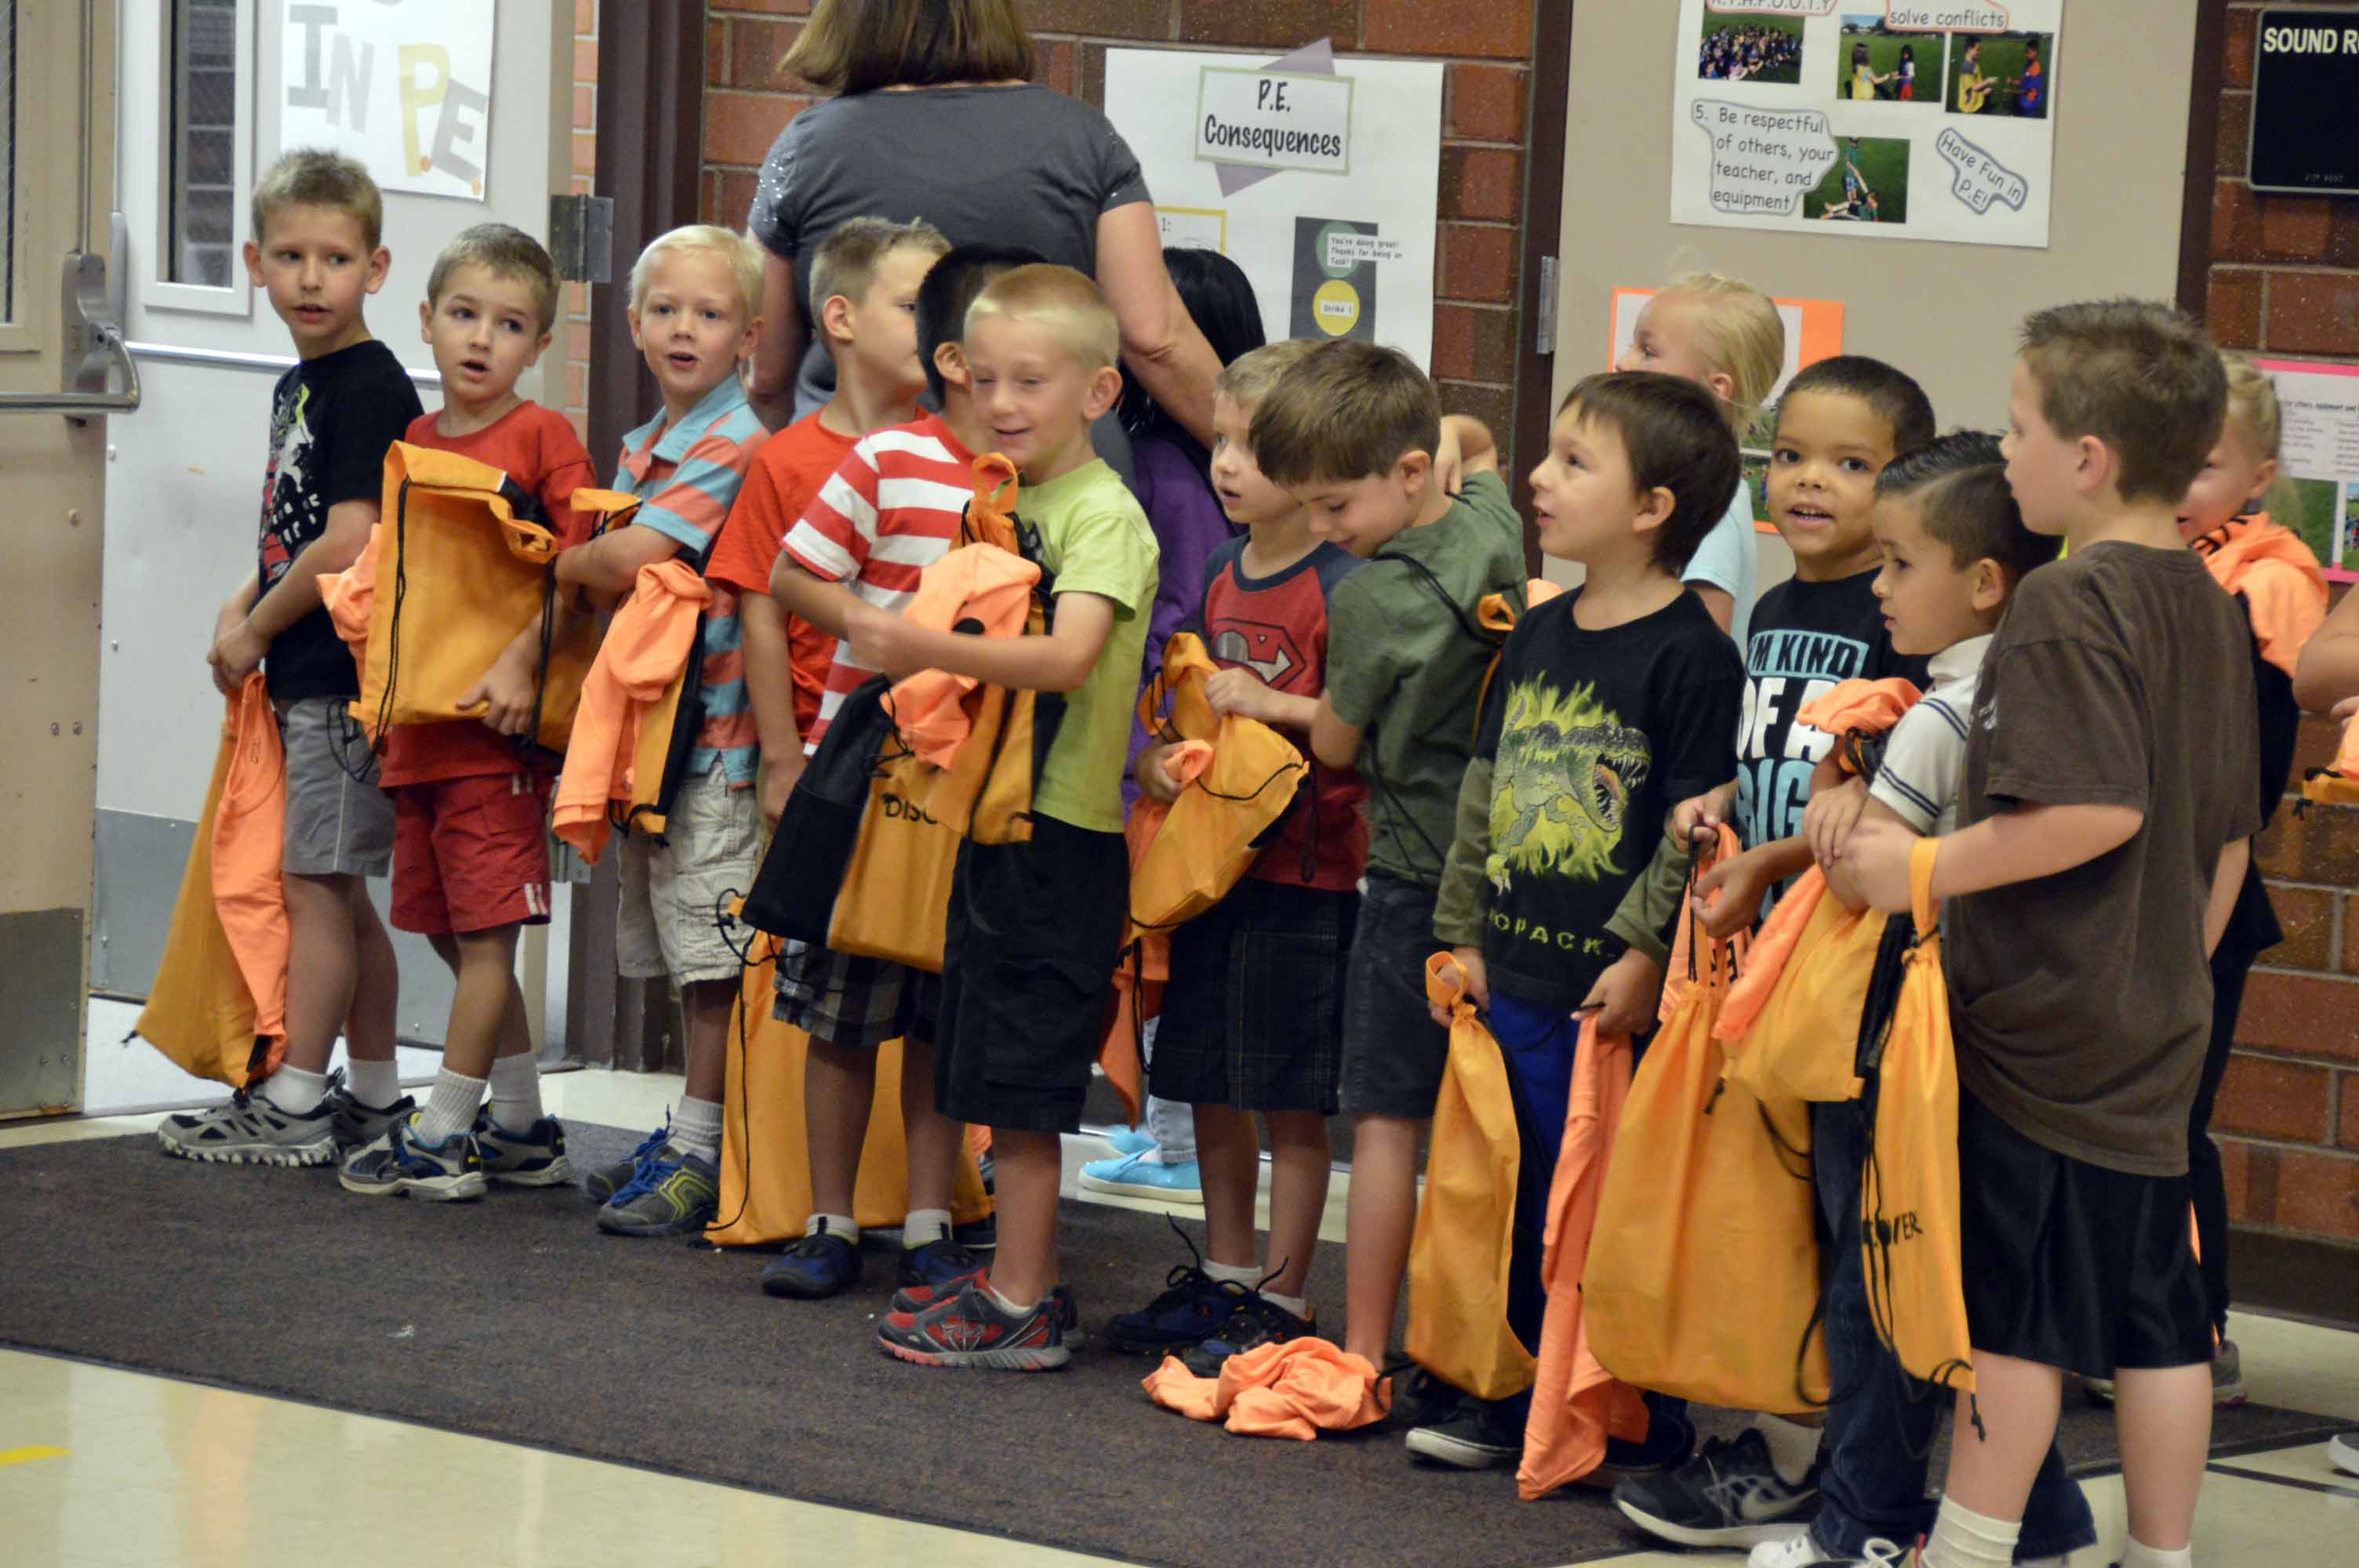 More than 3,500 backpacks delivered to GSD students